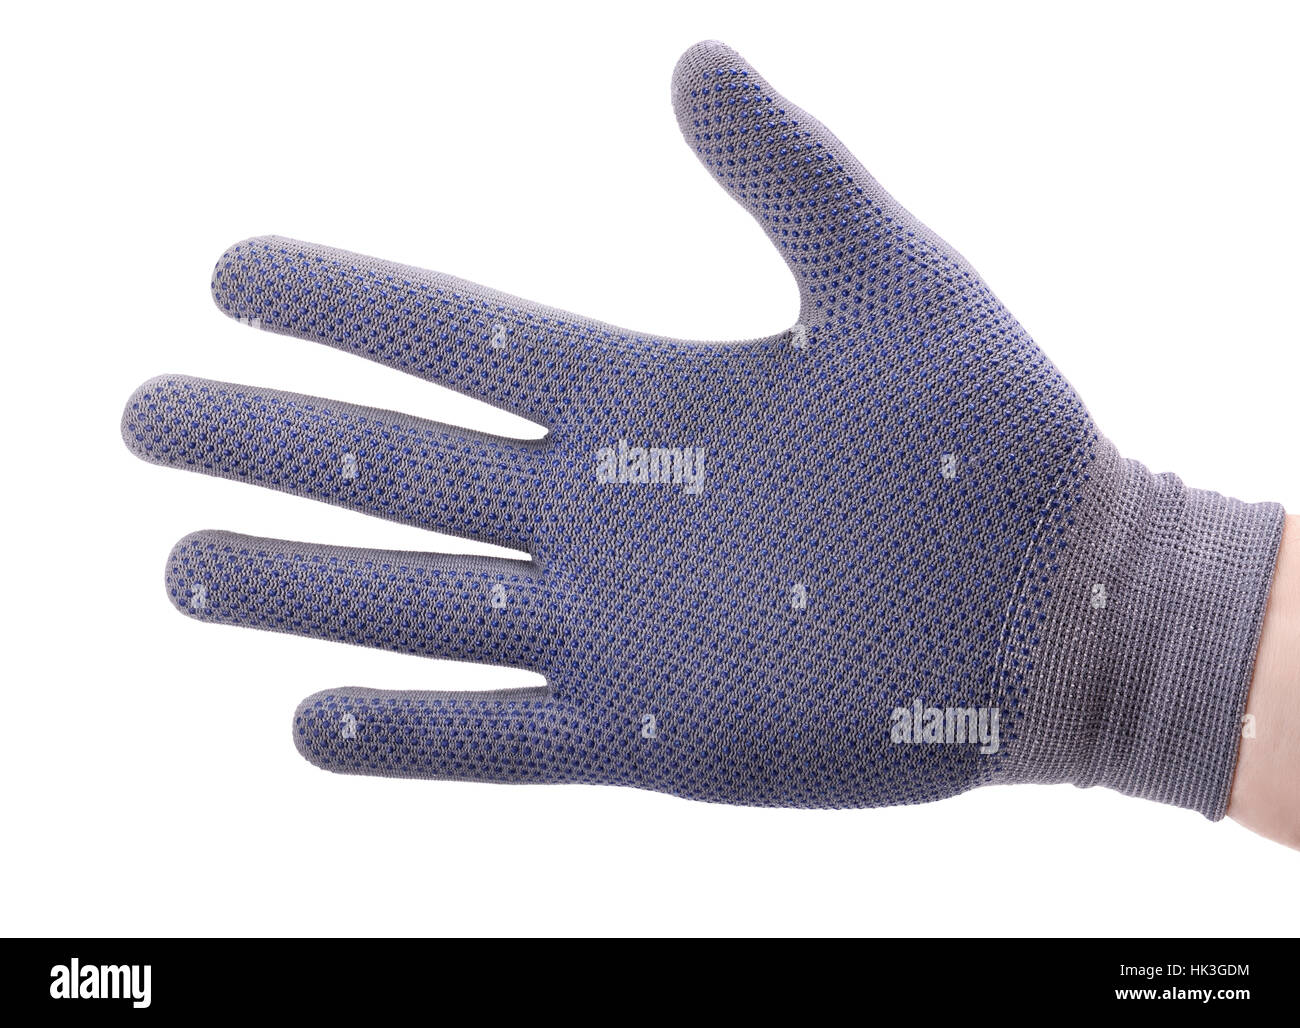 Rigth hand in cotton work glove isolated on white Stock Photo